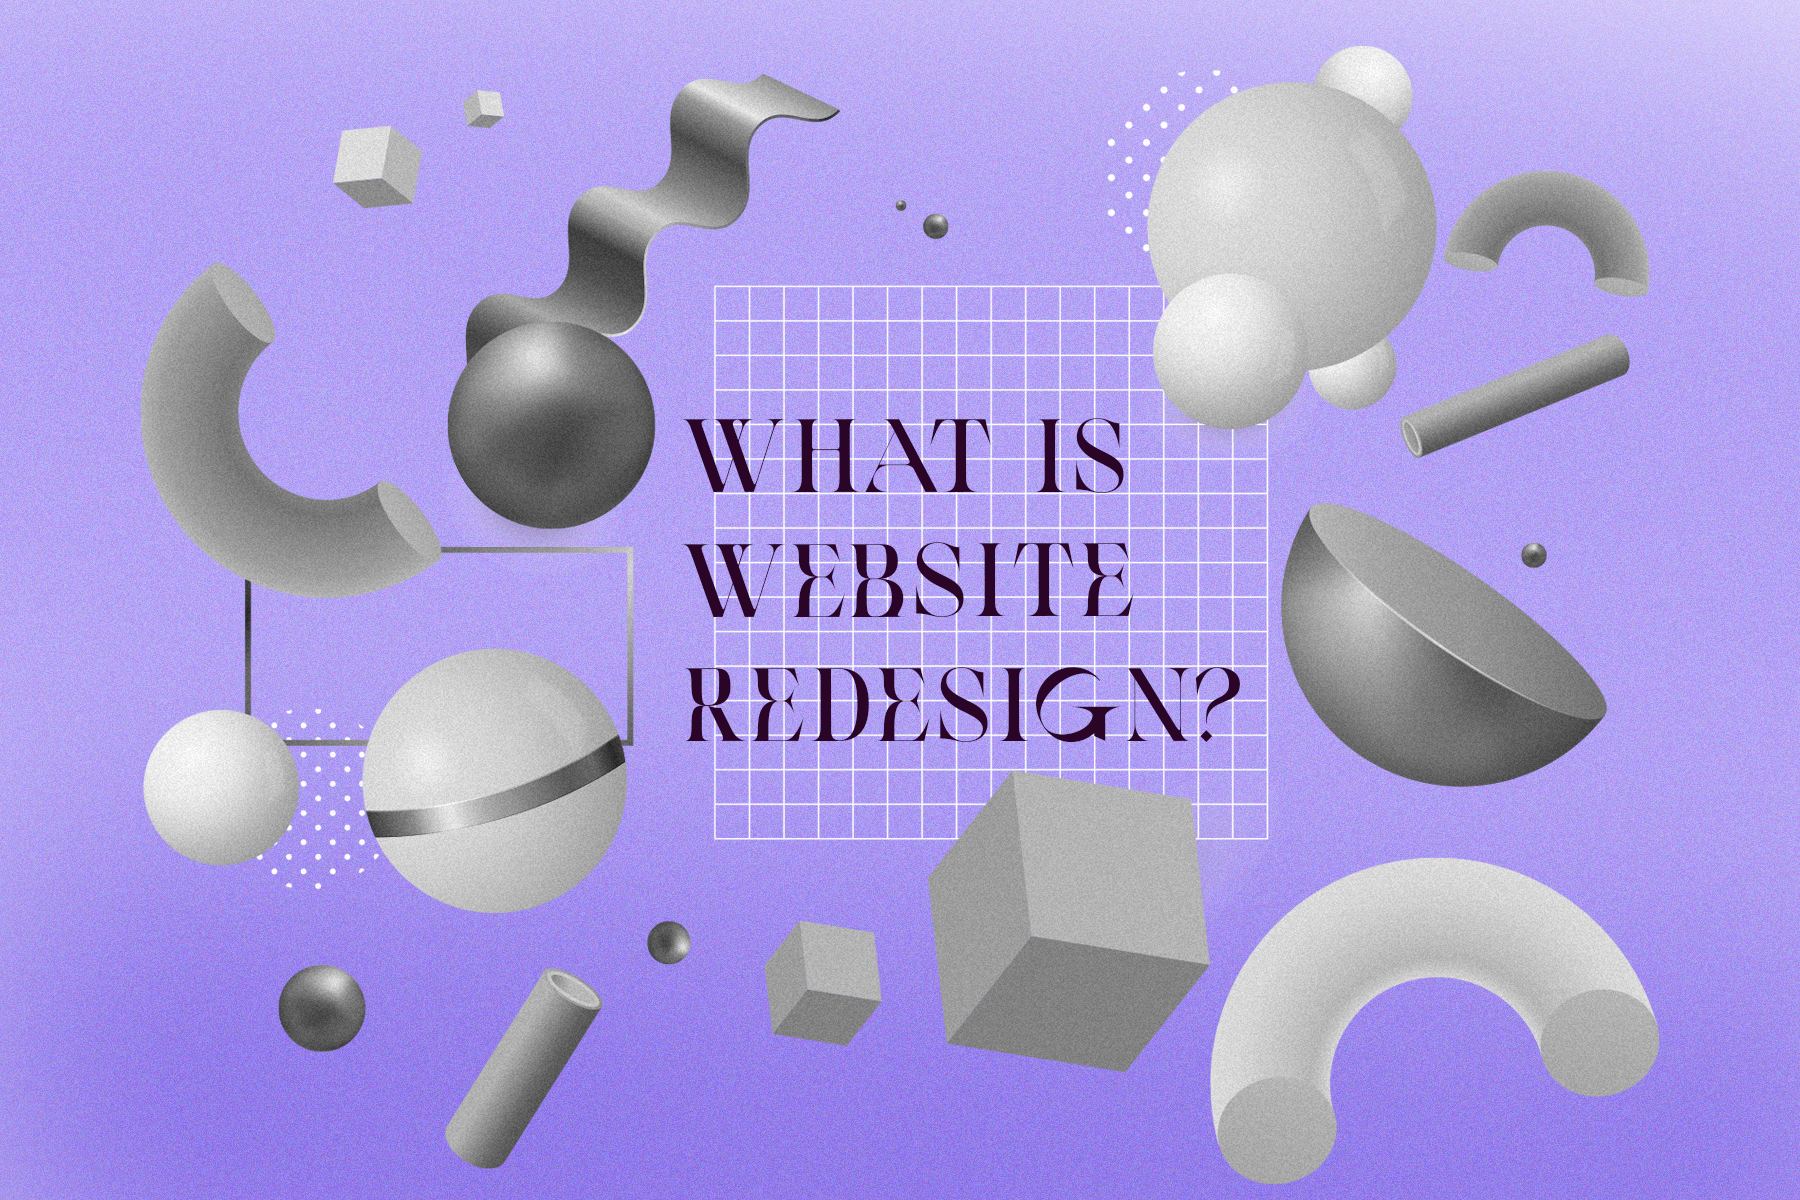 Different shapes and text "what is website redesign" in the middle